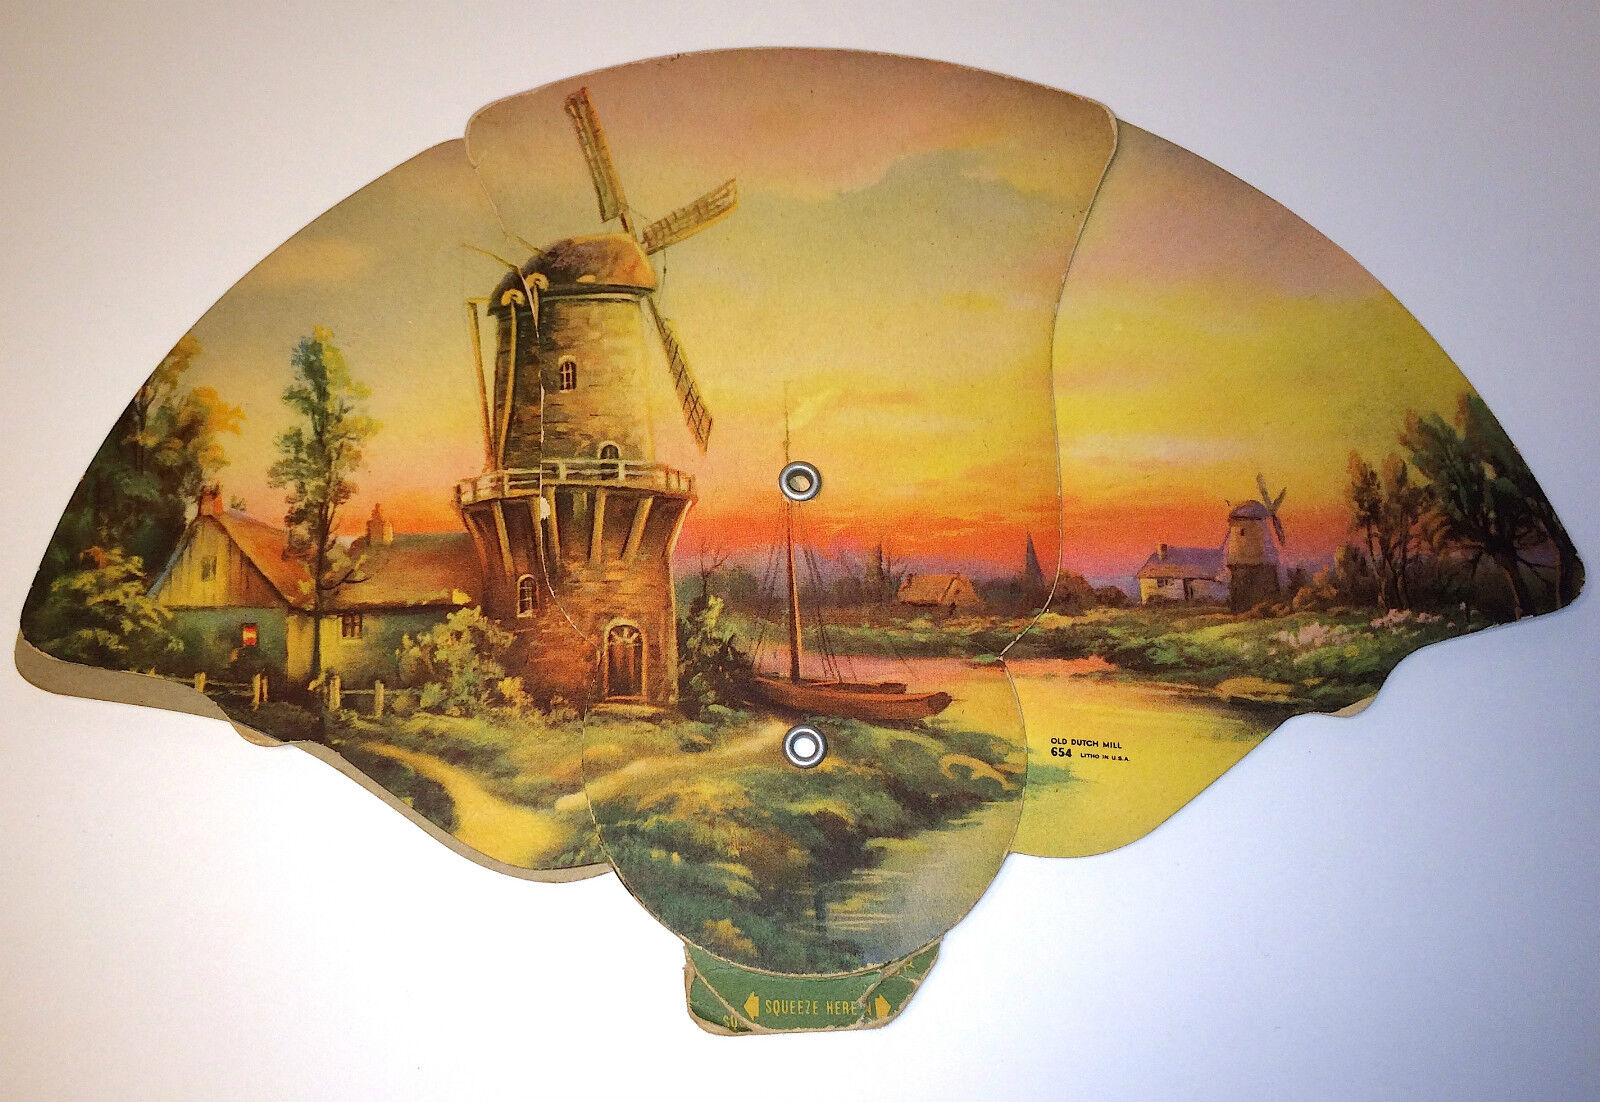 Rare Antique Phillips Funeral Home Windmill Advertising Fan Old 5 Digit Phone #